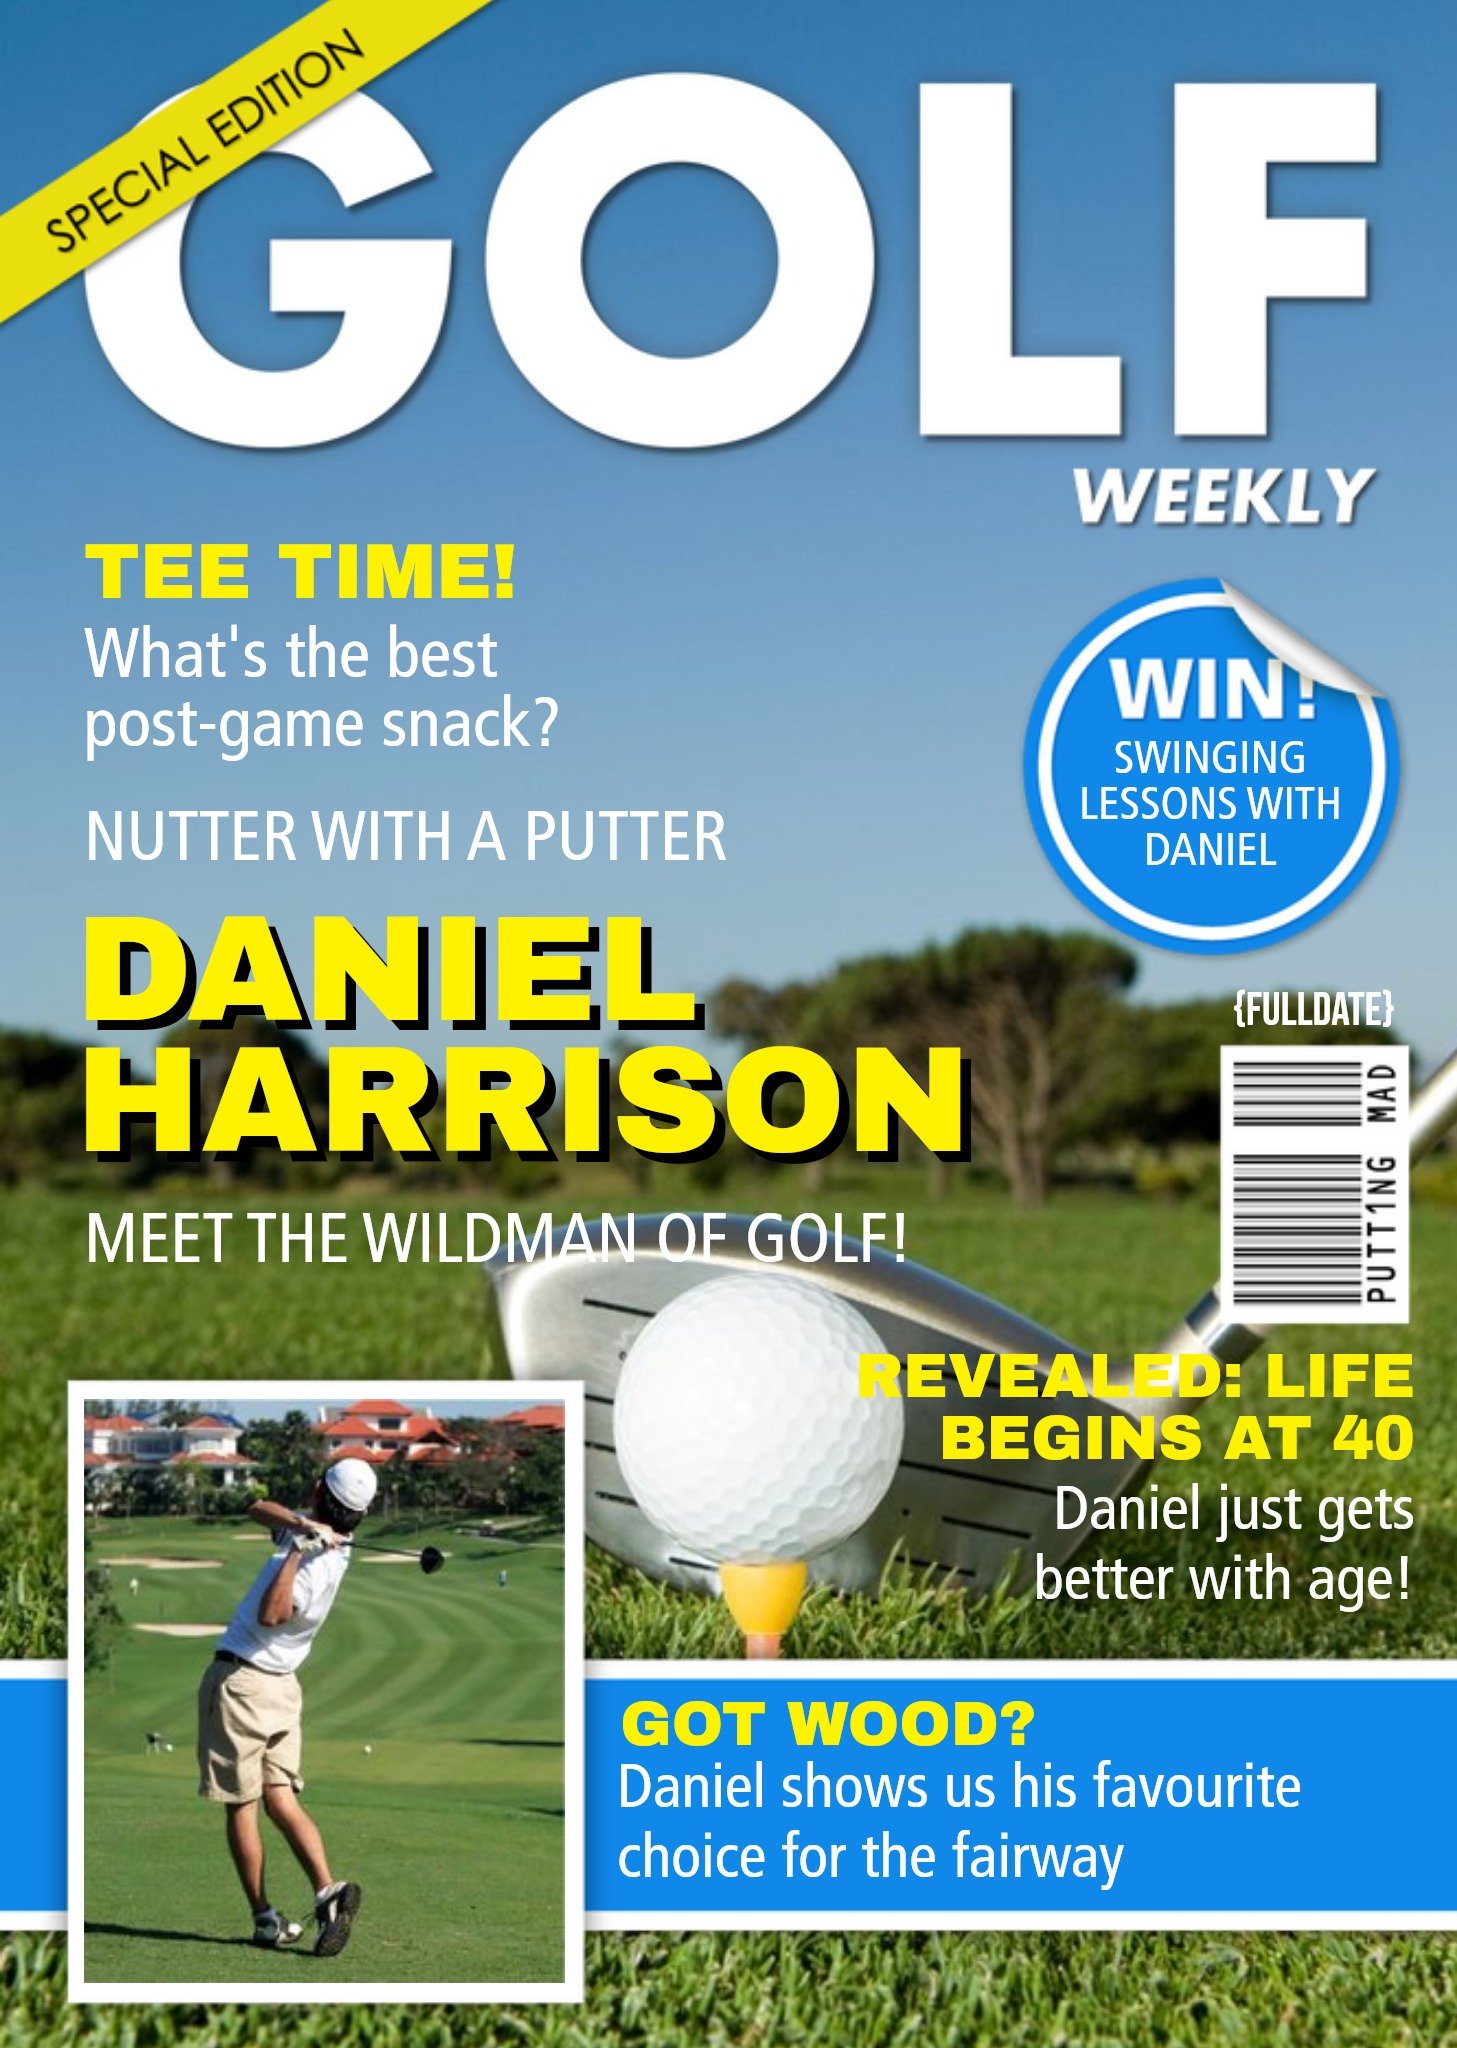 Moonpig Golf Weekly Special Edition Spoof Magazine Happy Birthday Card, Large